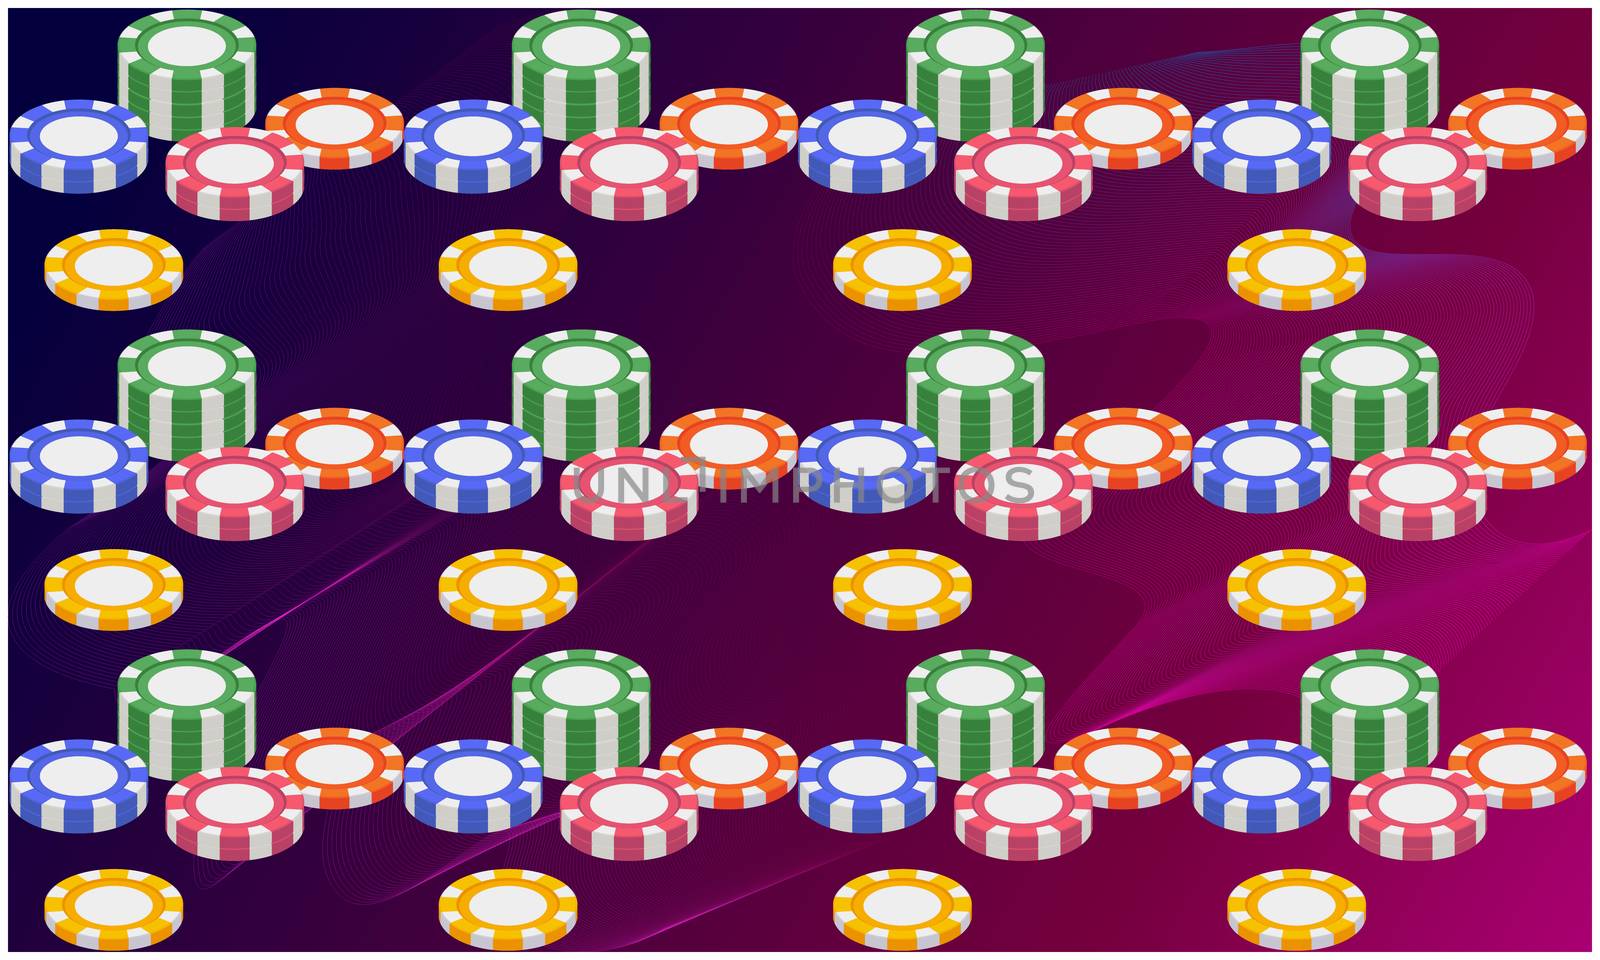 digital textile design of poker coins on abstract background